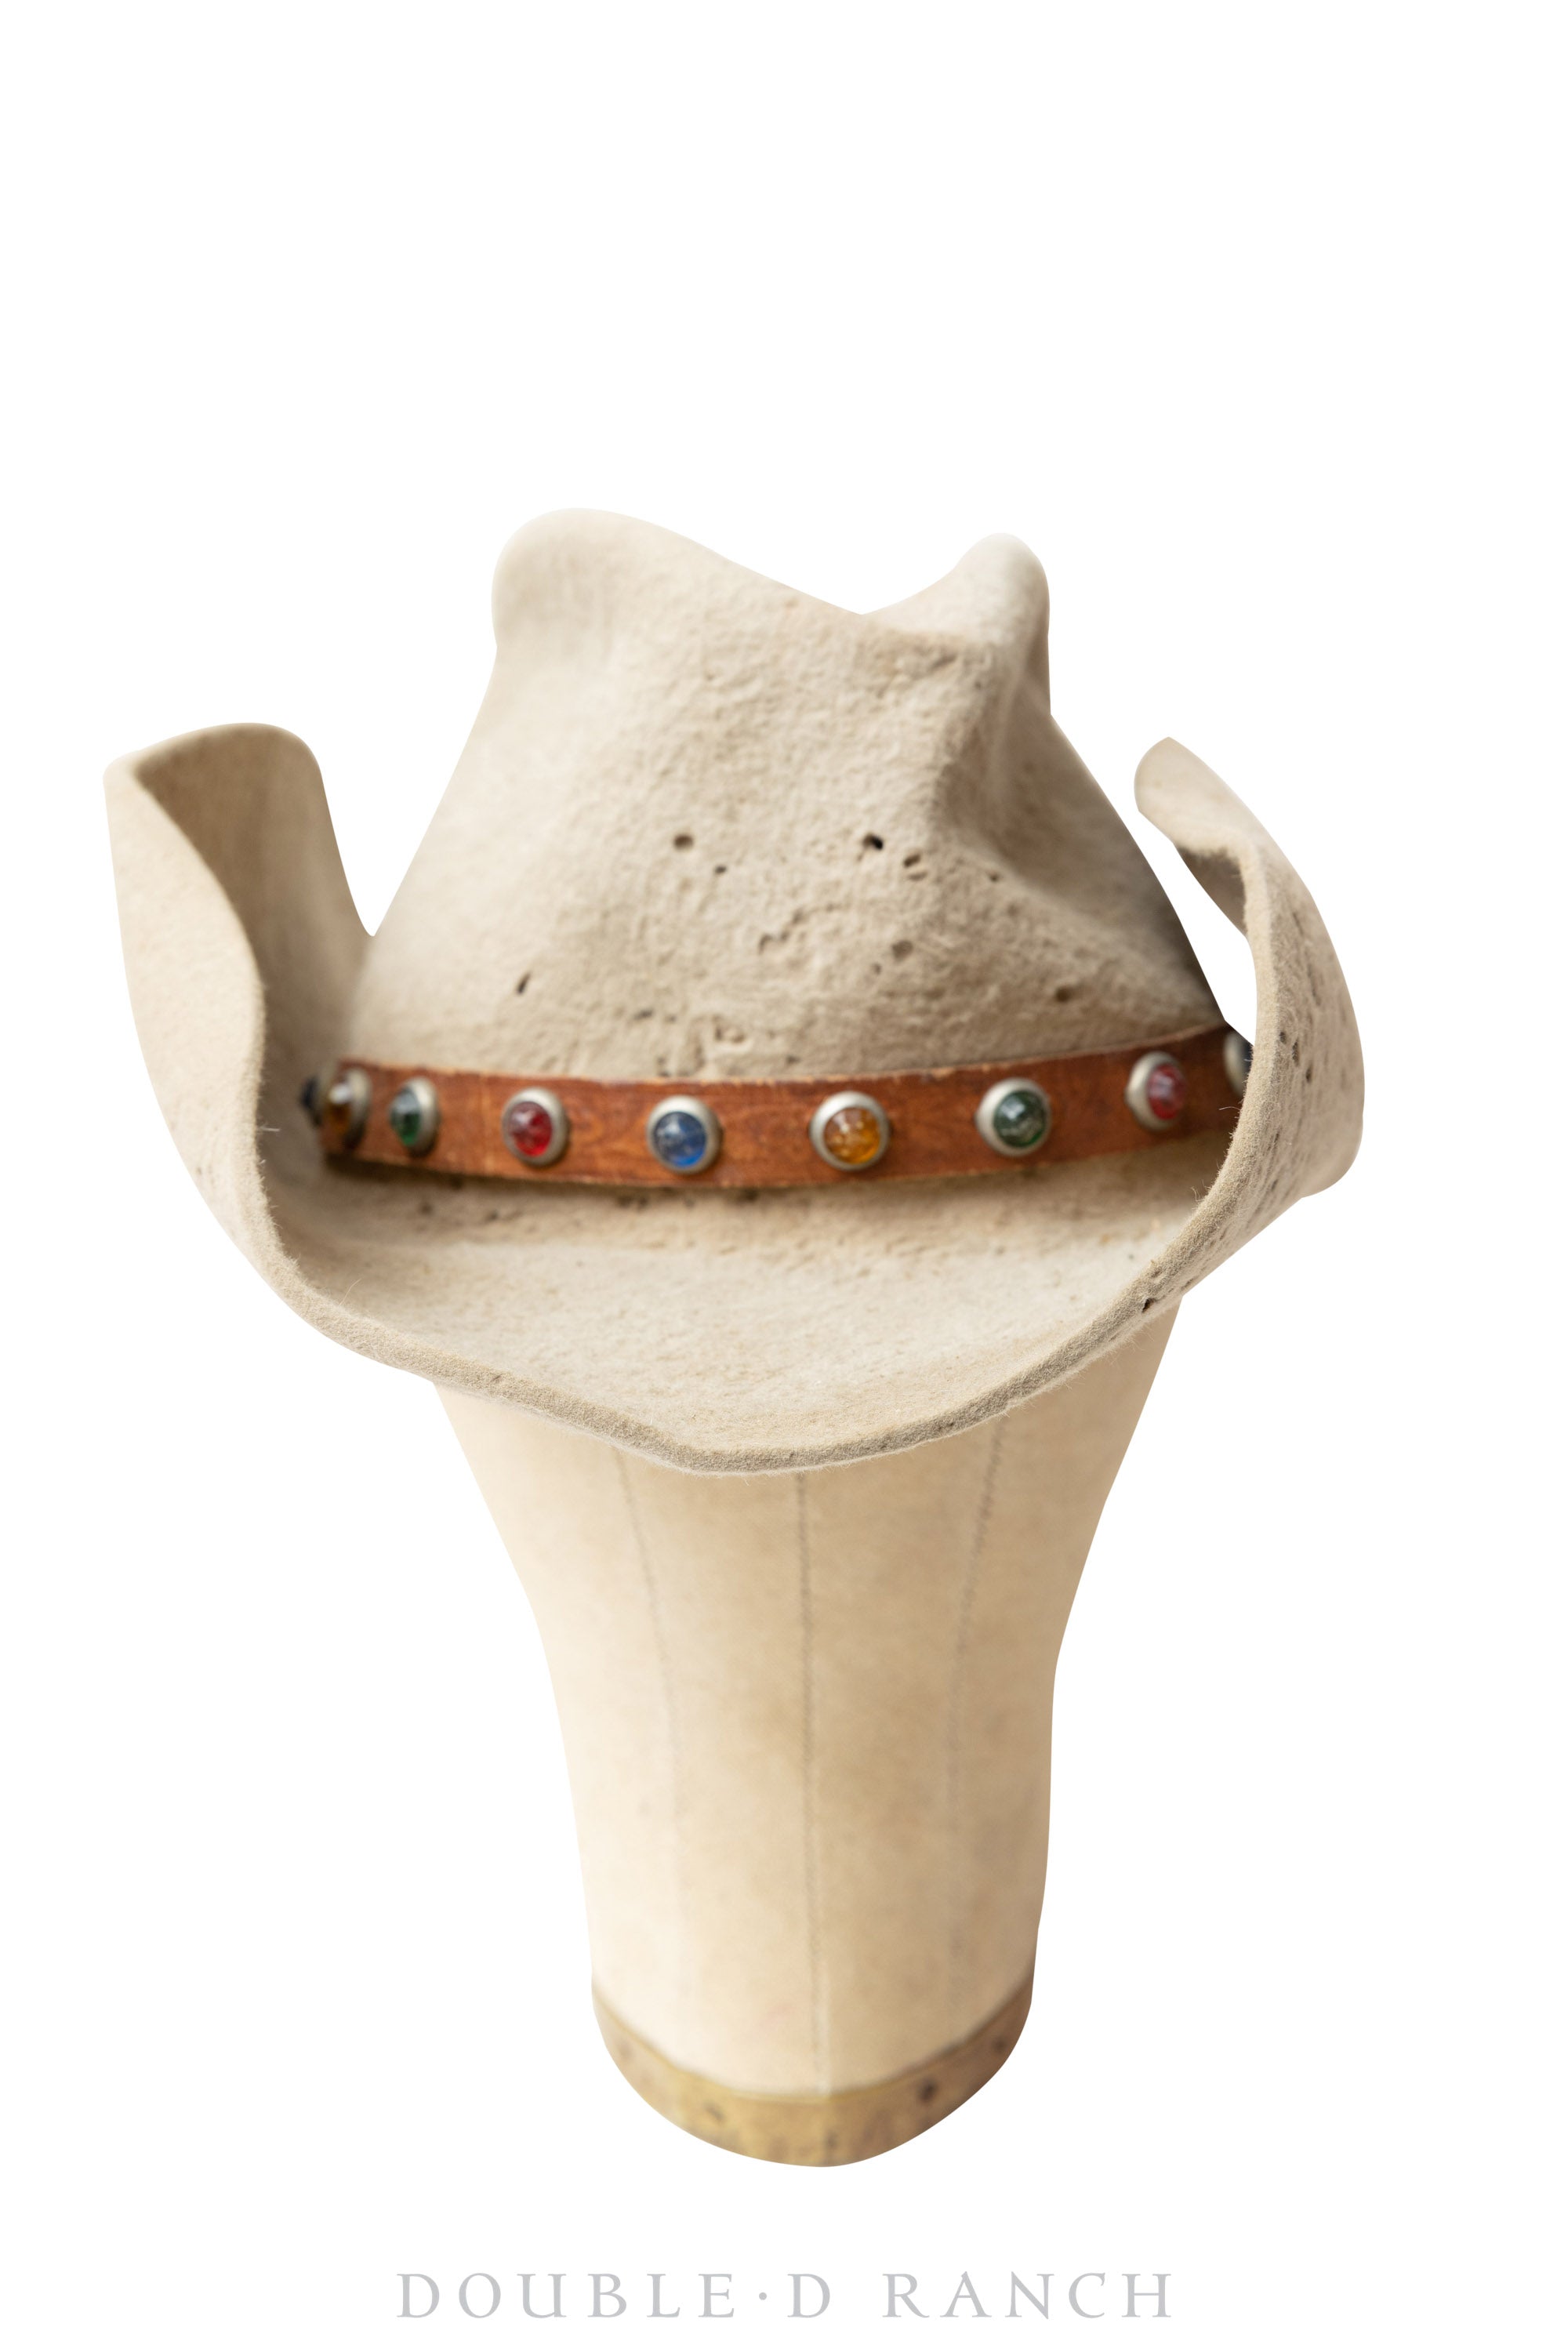 Miscellaneous, Hat, Vintage, Wool Felt, Leather Hatband With Gems, Attributed to Bill Pickett, Antique, 765